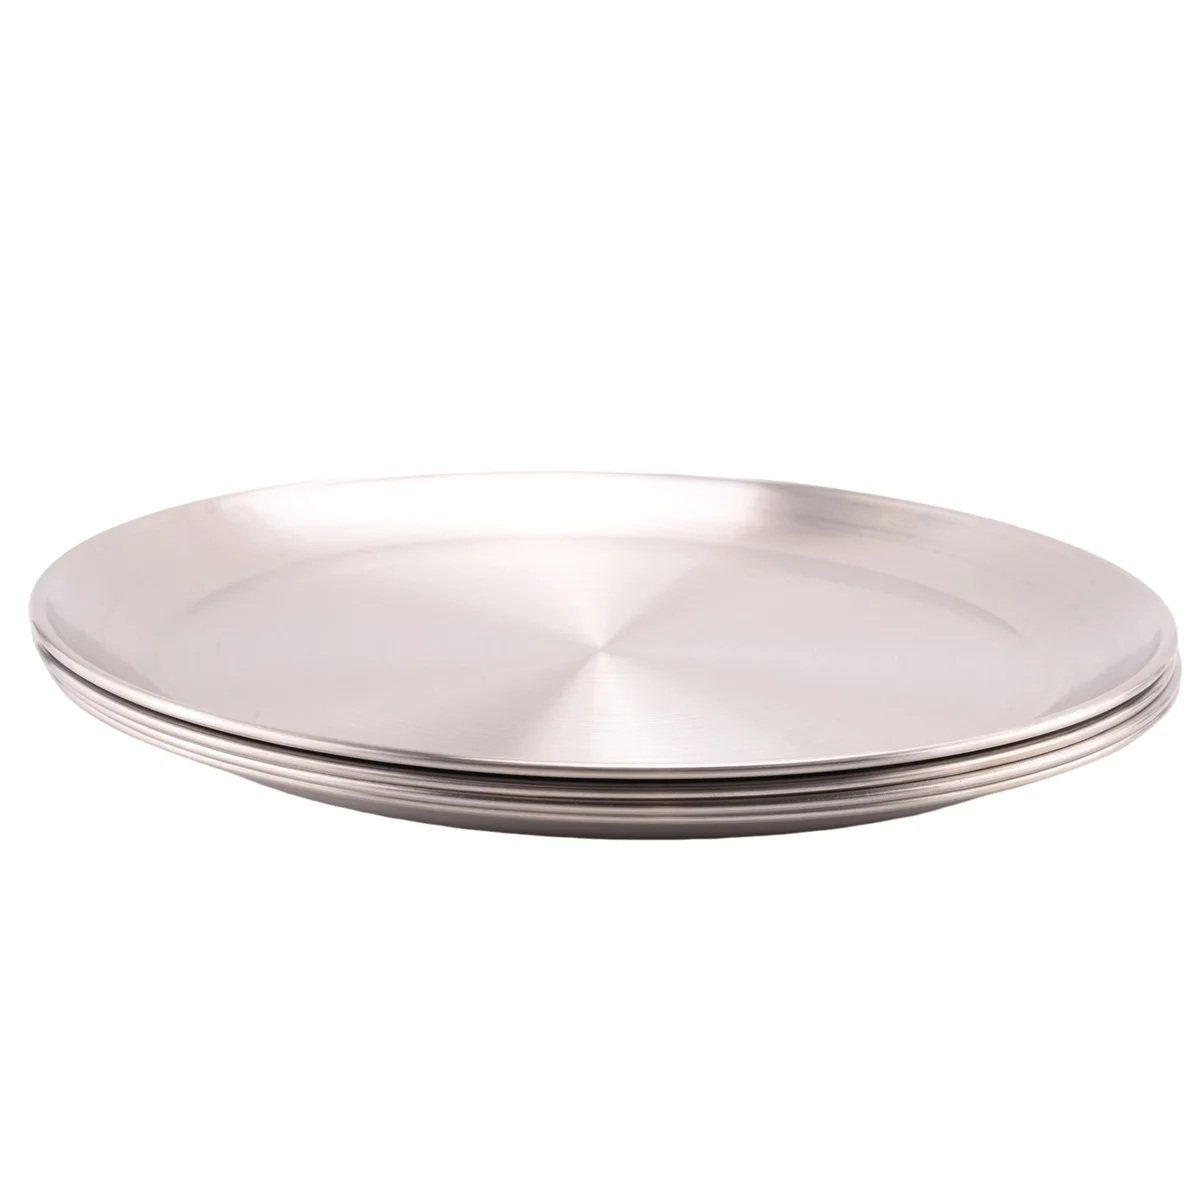 

4 Pack 12 Inch Pizza Tray,Stainless Steel Pizza Oven Baking Tray,Round Pizza Baking Sheet,for Baking Roasting Serving